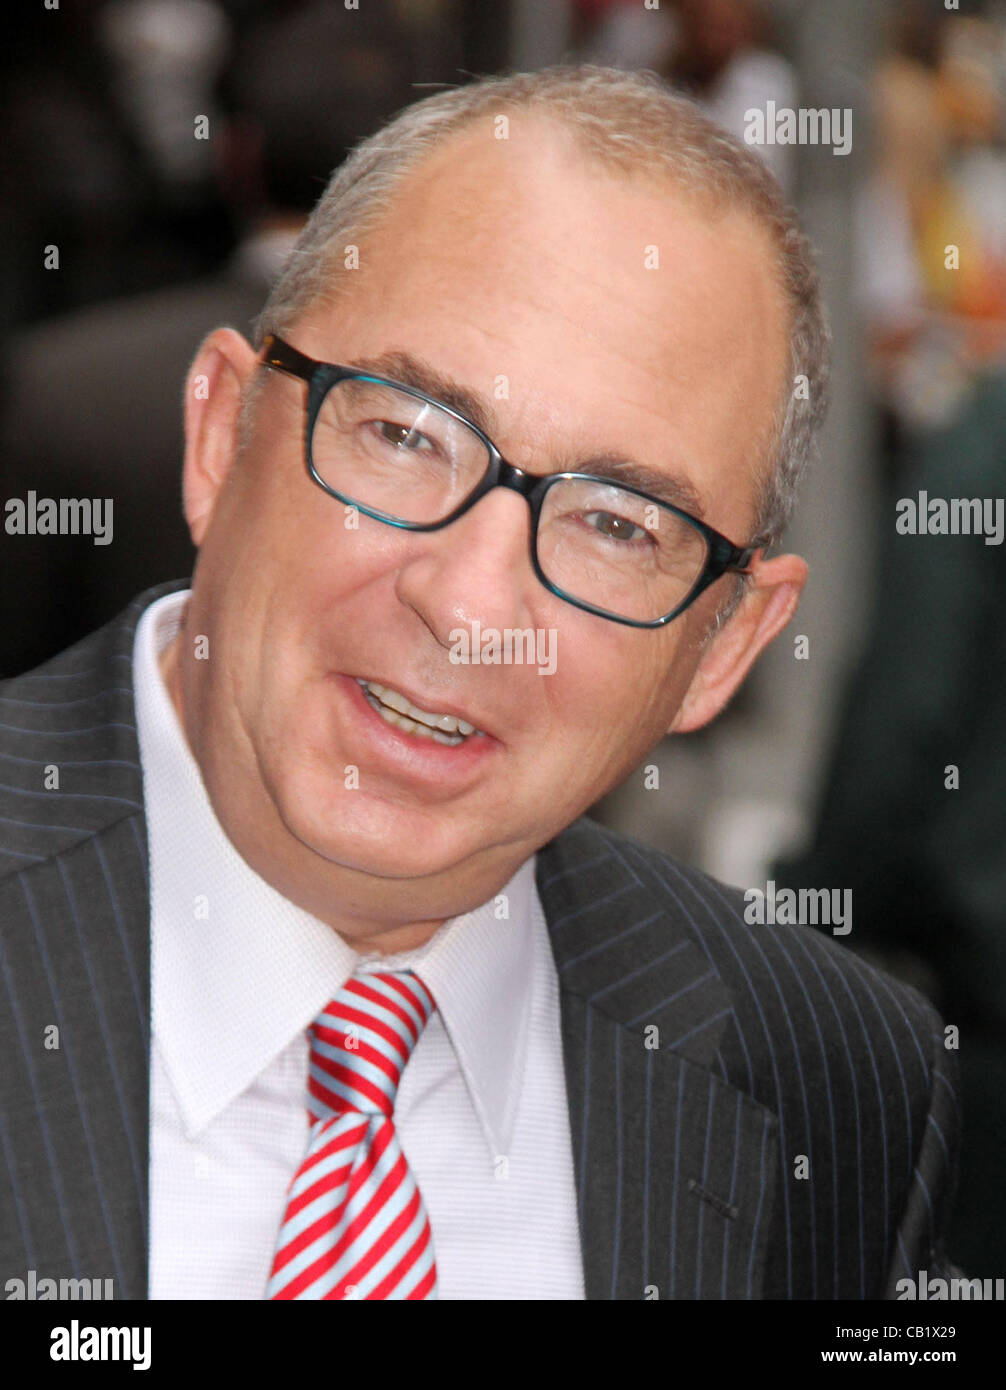 May 21, 2012 - New York, New York, U.S. - Director BARRY SONNENFELD at his appearance on 'The Late Show With David Letterman' held at the Ed Sullivan Theater. (Credit Image: © Nancy Kaszerman/ZUMAPRESS.com) Stock Photo